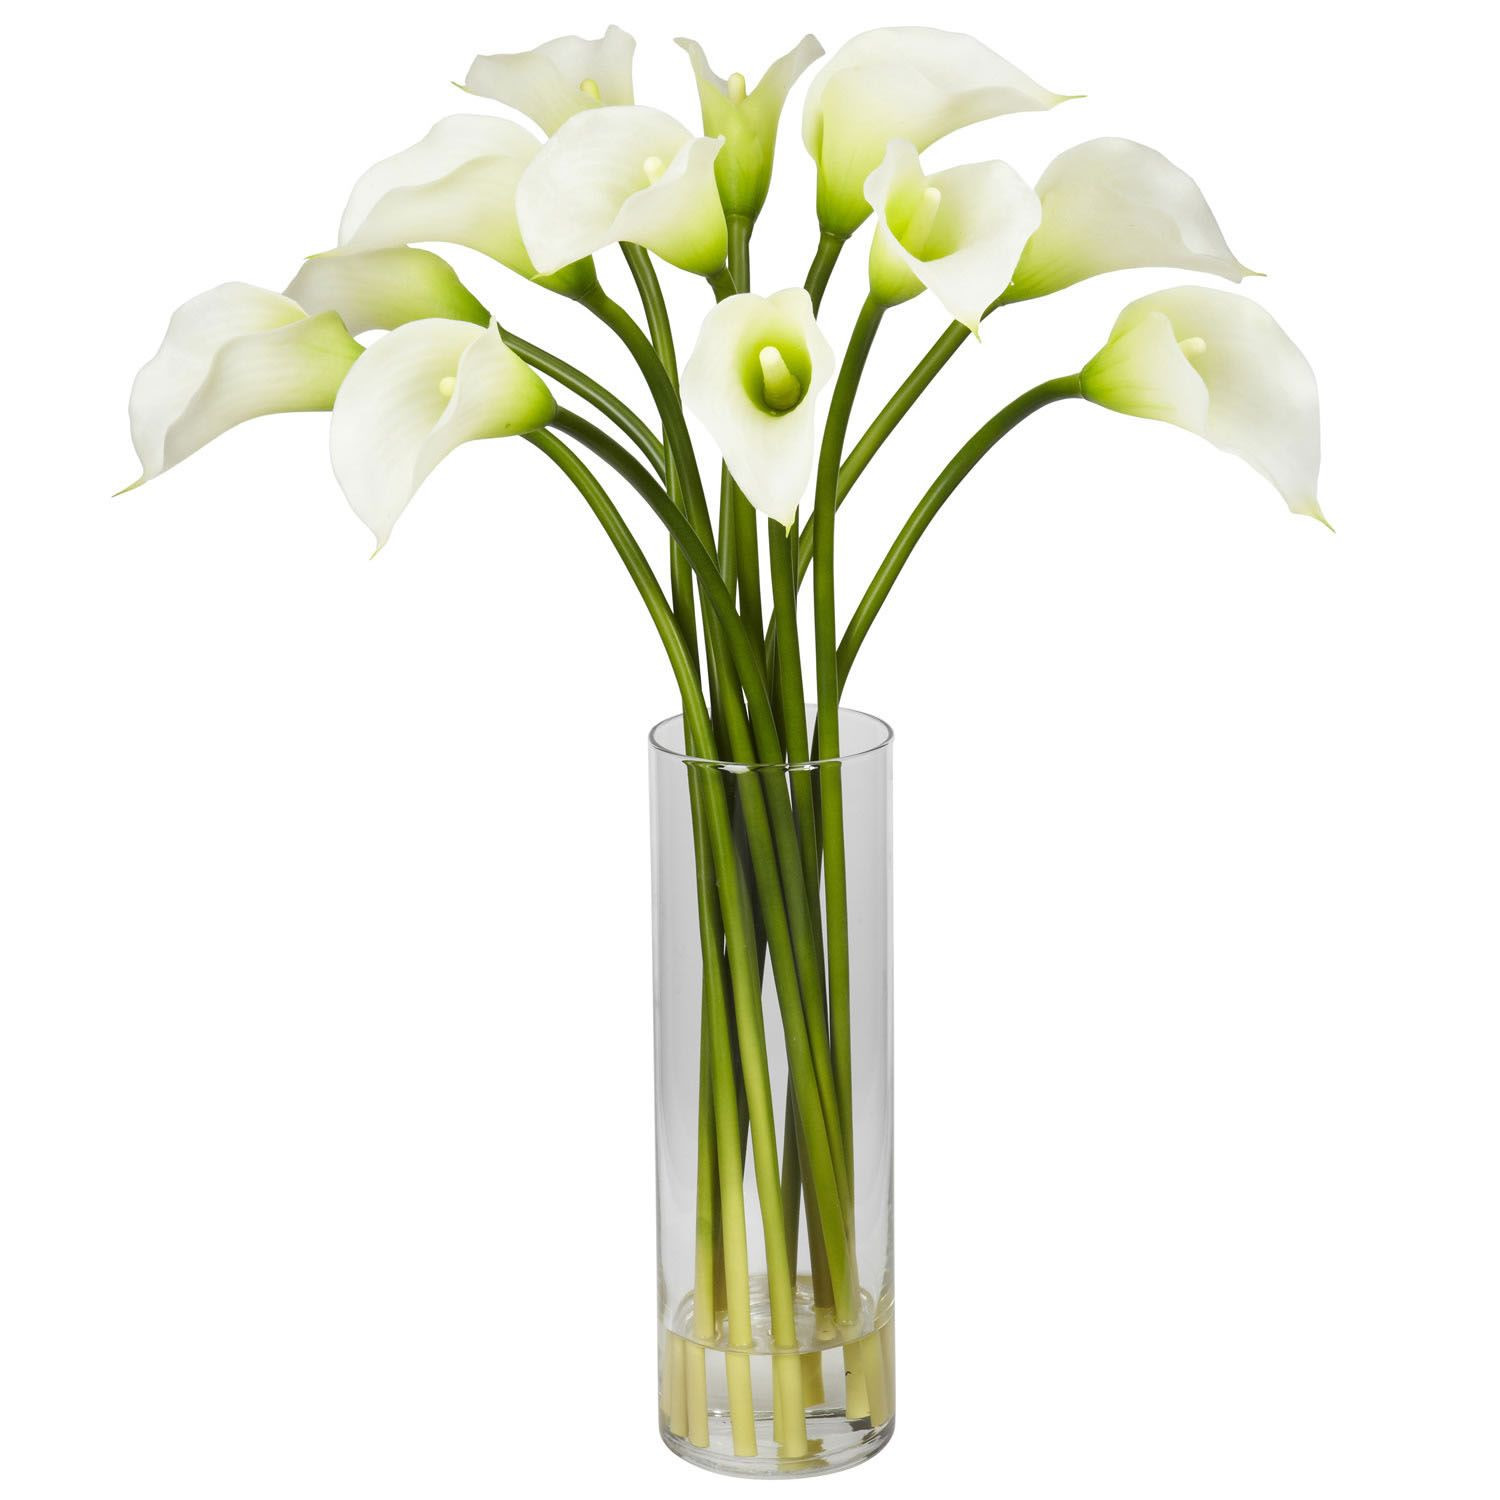 30 Fabulous Stay In the Vase Cemetery Flowers 2024 free download stay in the vase cemetery flowers of 45 how to make silk flower arrangements for cemetery vases the inside decorme decorme silk flowers decorme